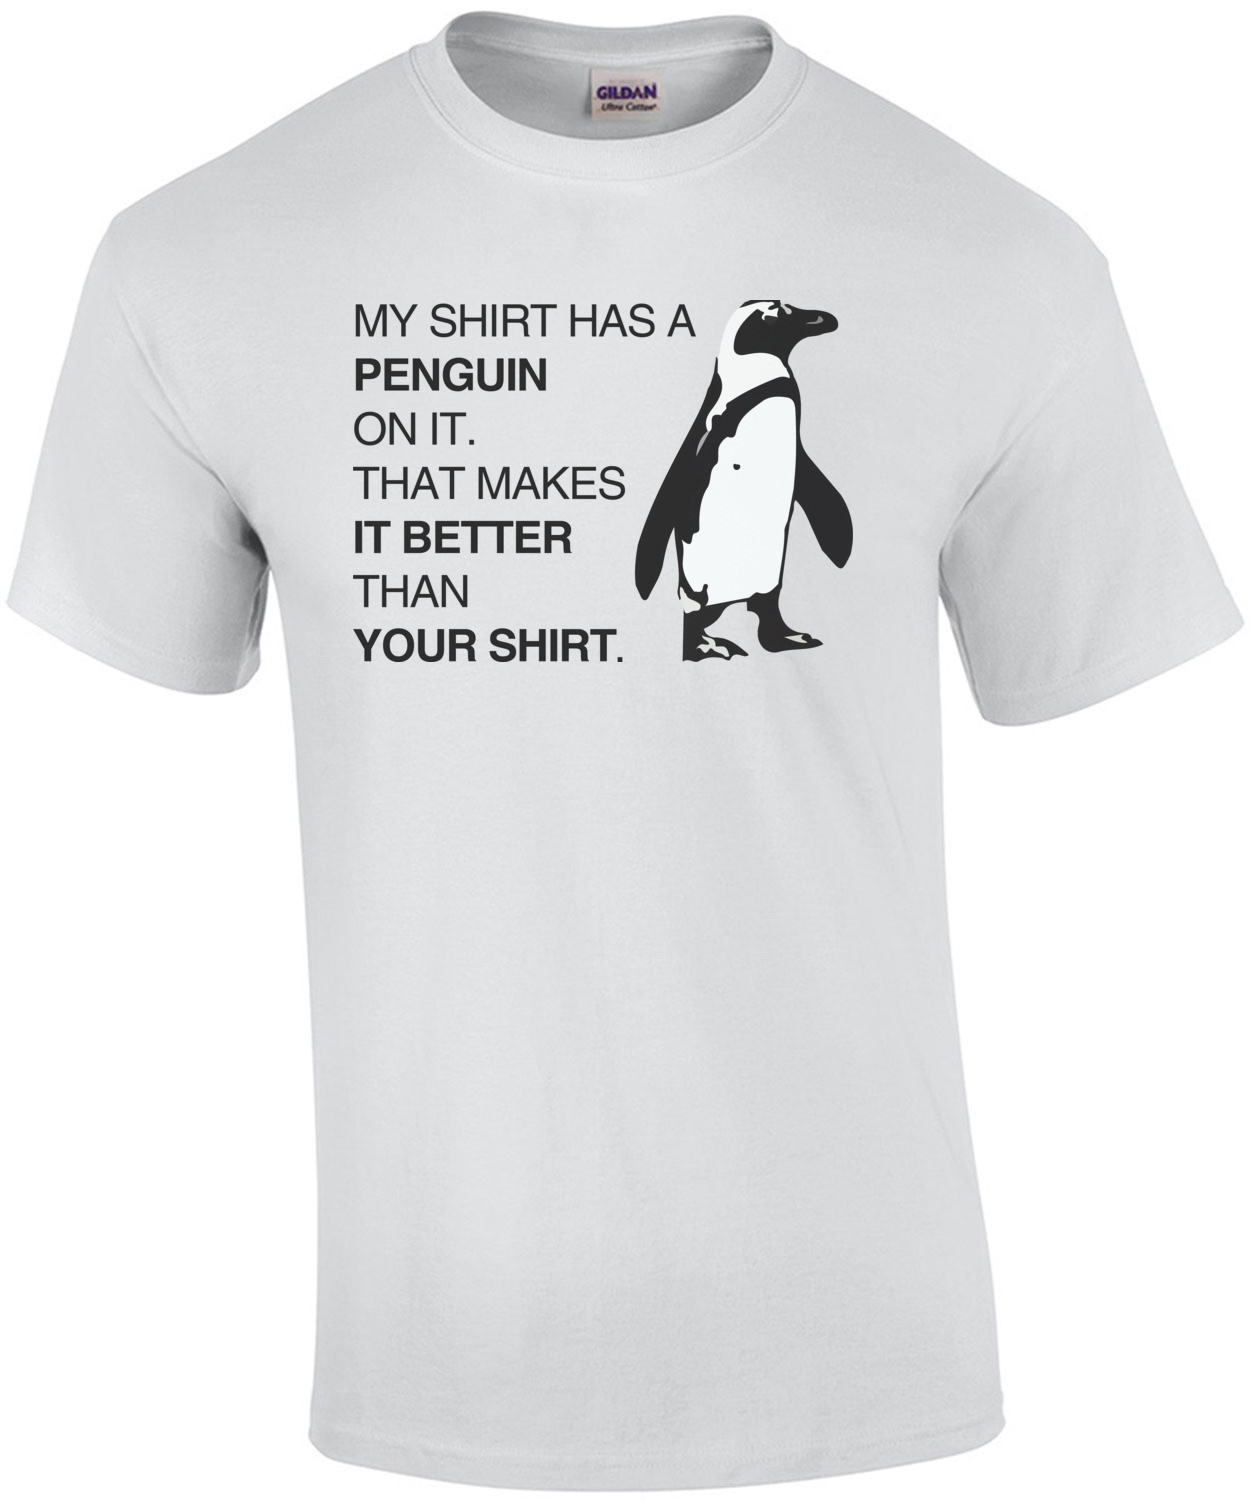 My shirt has a penguin on it. That makes it better than your shirt. T-Shirt